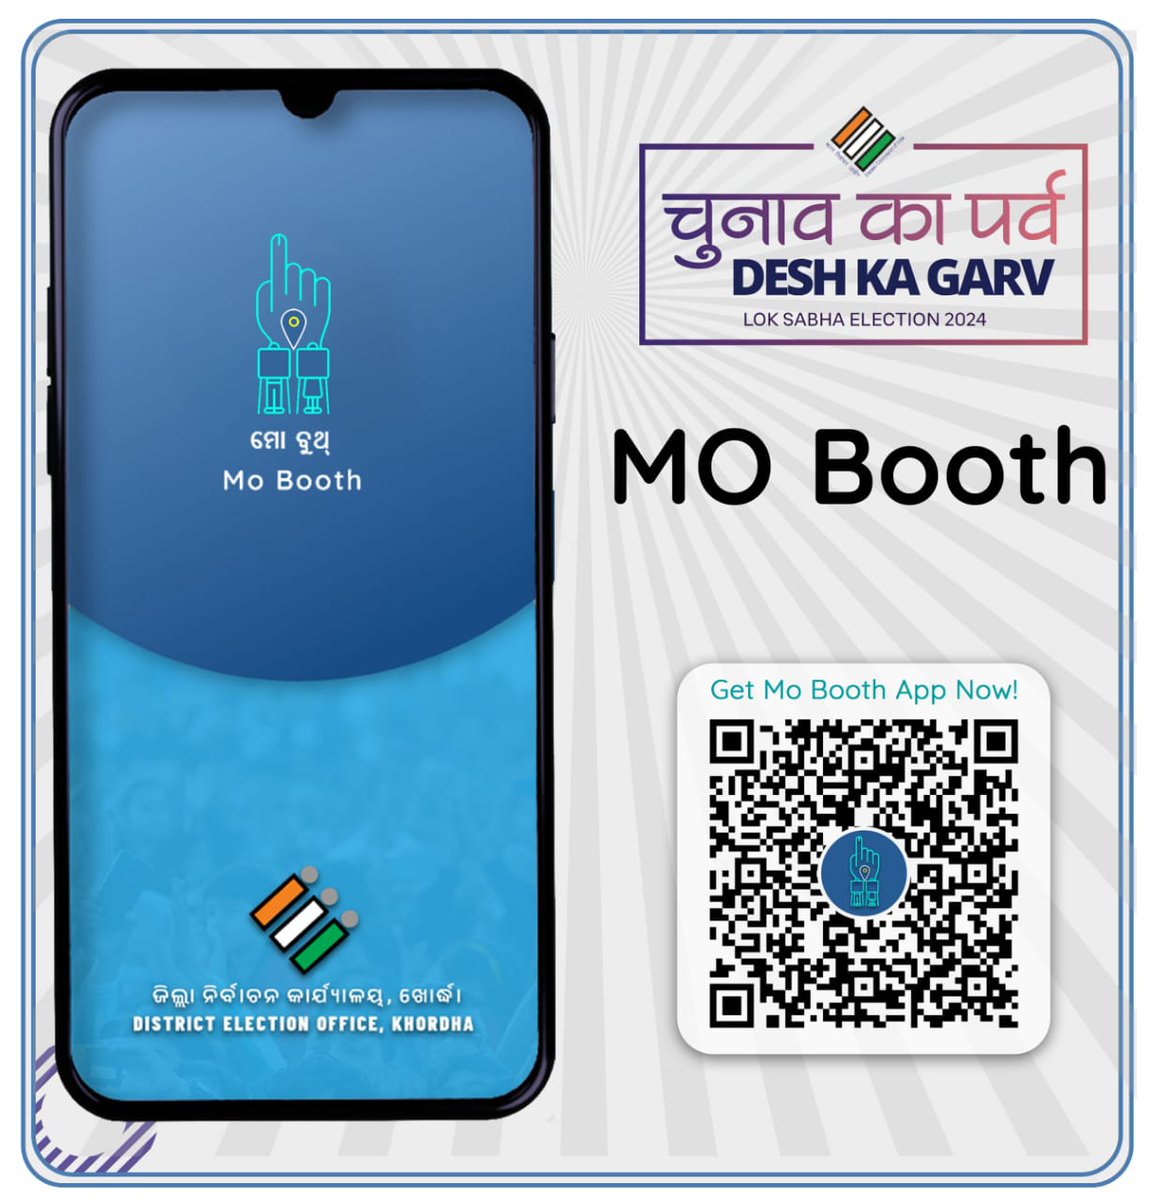 Good news!! Now, Voters of Khordha district can download the 'Mo Booth' app from the Google Play Store or click on the link MoBooth.odisha.gov.in to find the location and route of your polling station and check real-time queue status on poll day (25th May). #ChunavKaParv